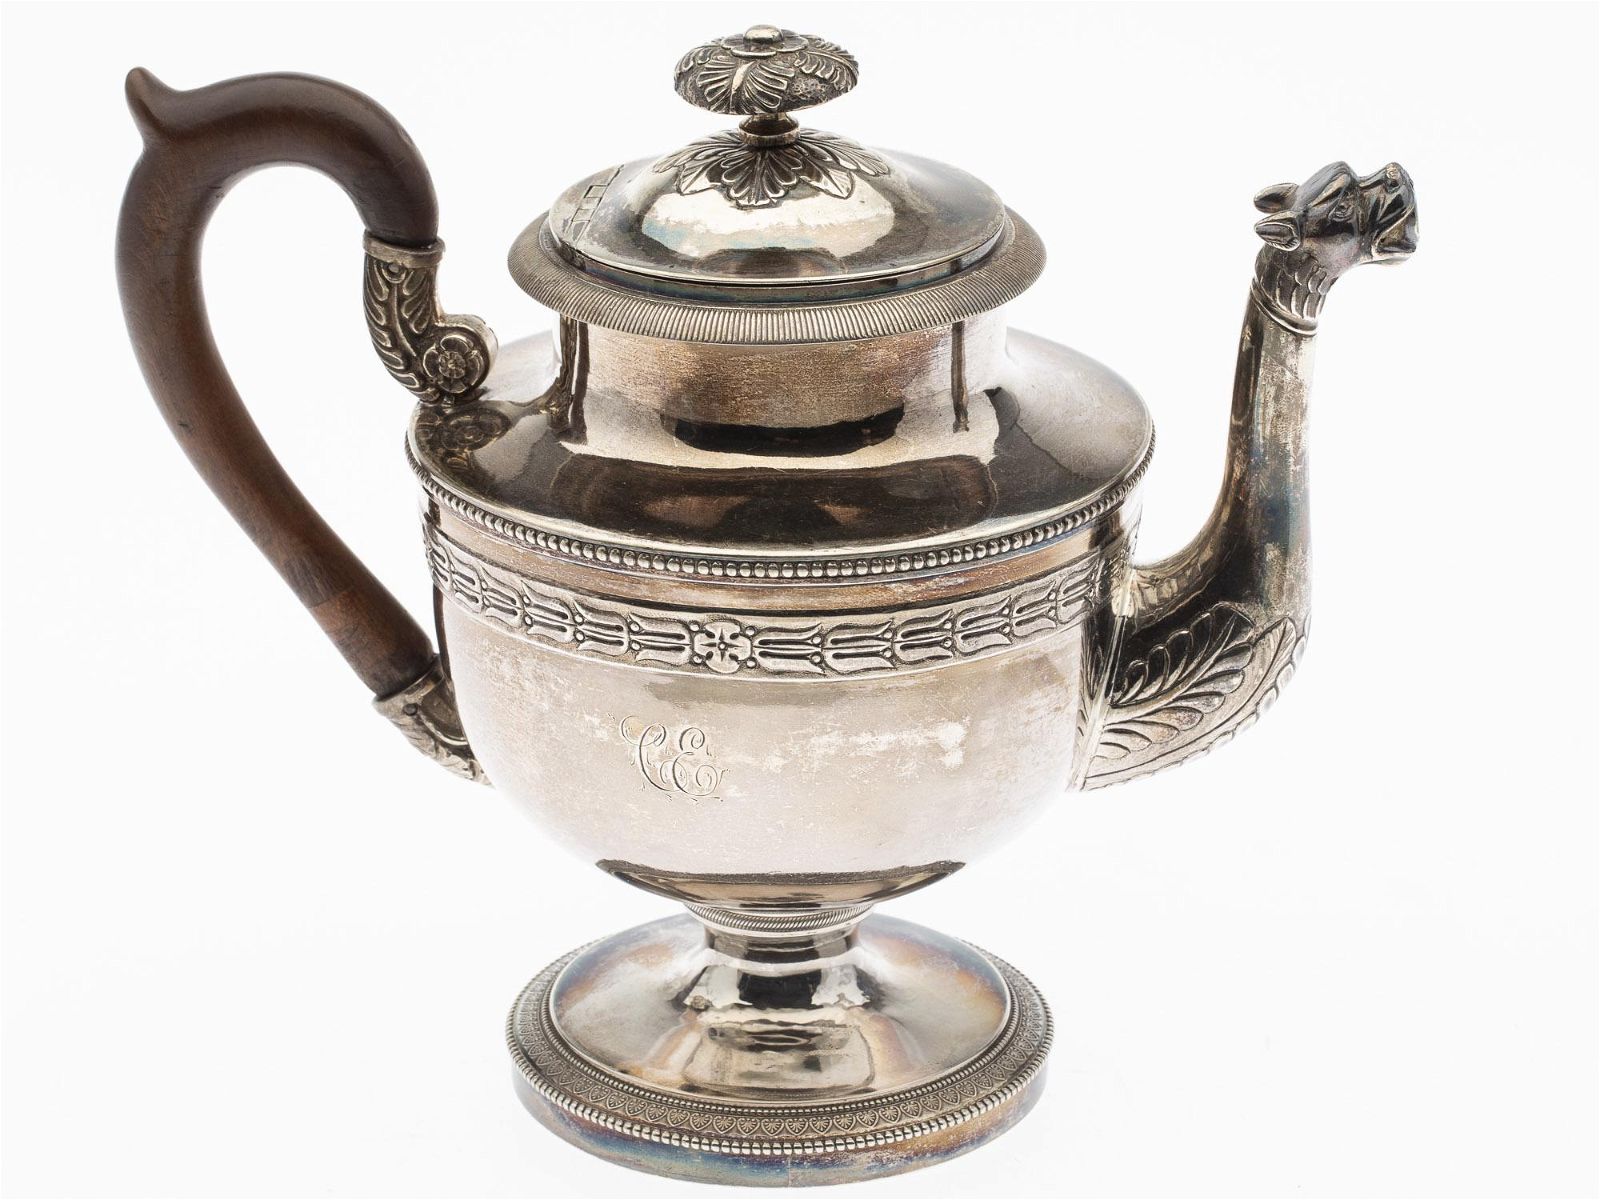 ANTHONY RASCH, COIN SILVER TEAPOT,